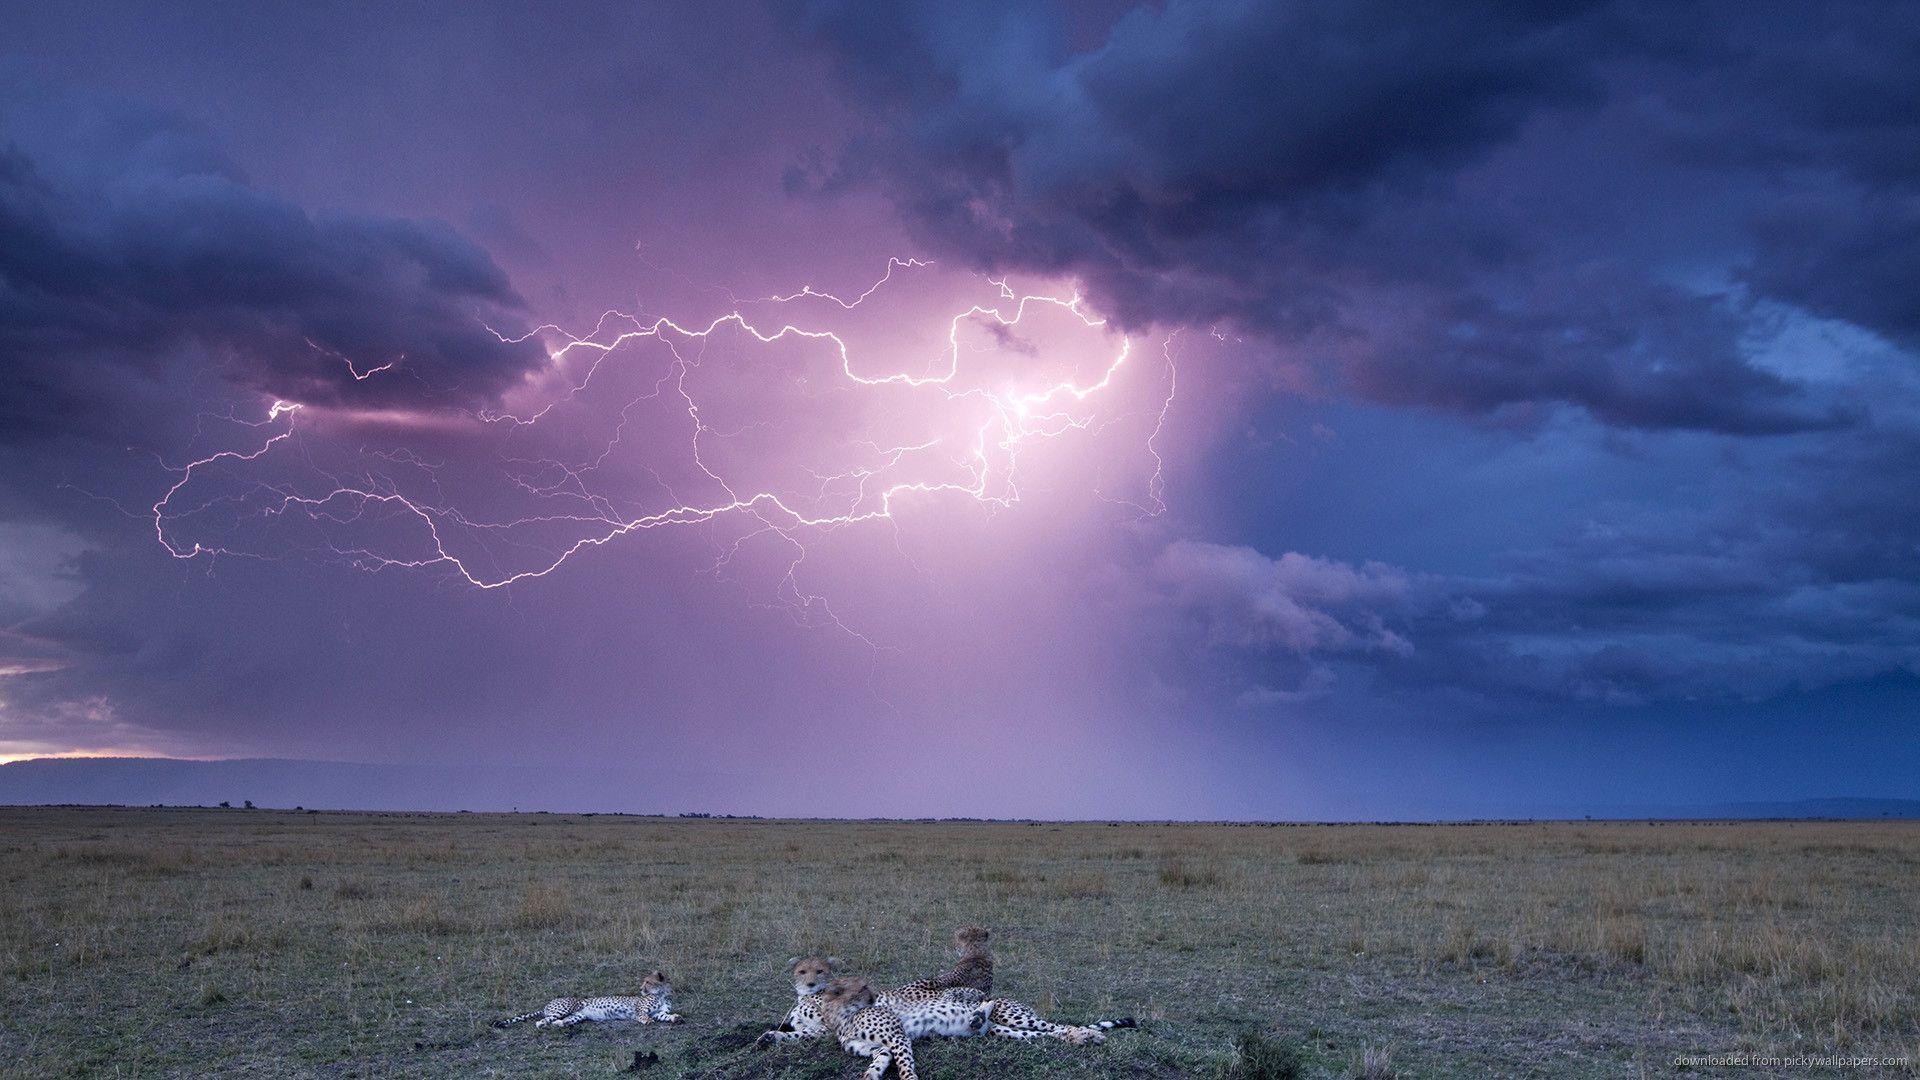 Download 1920x1080 Leopards And Lightning Storm Wallpaper